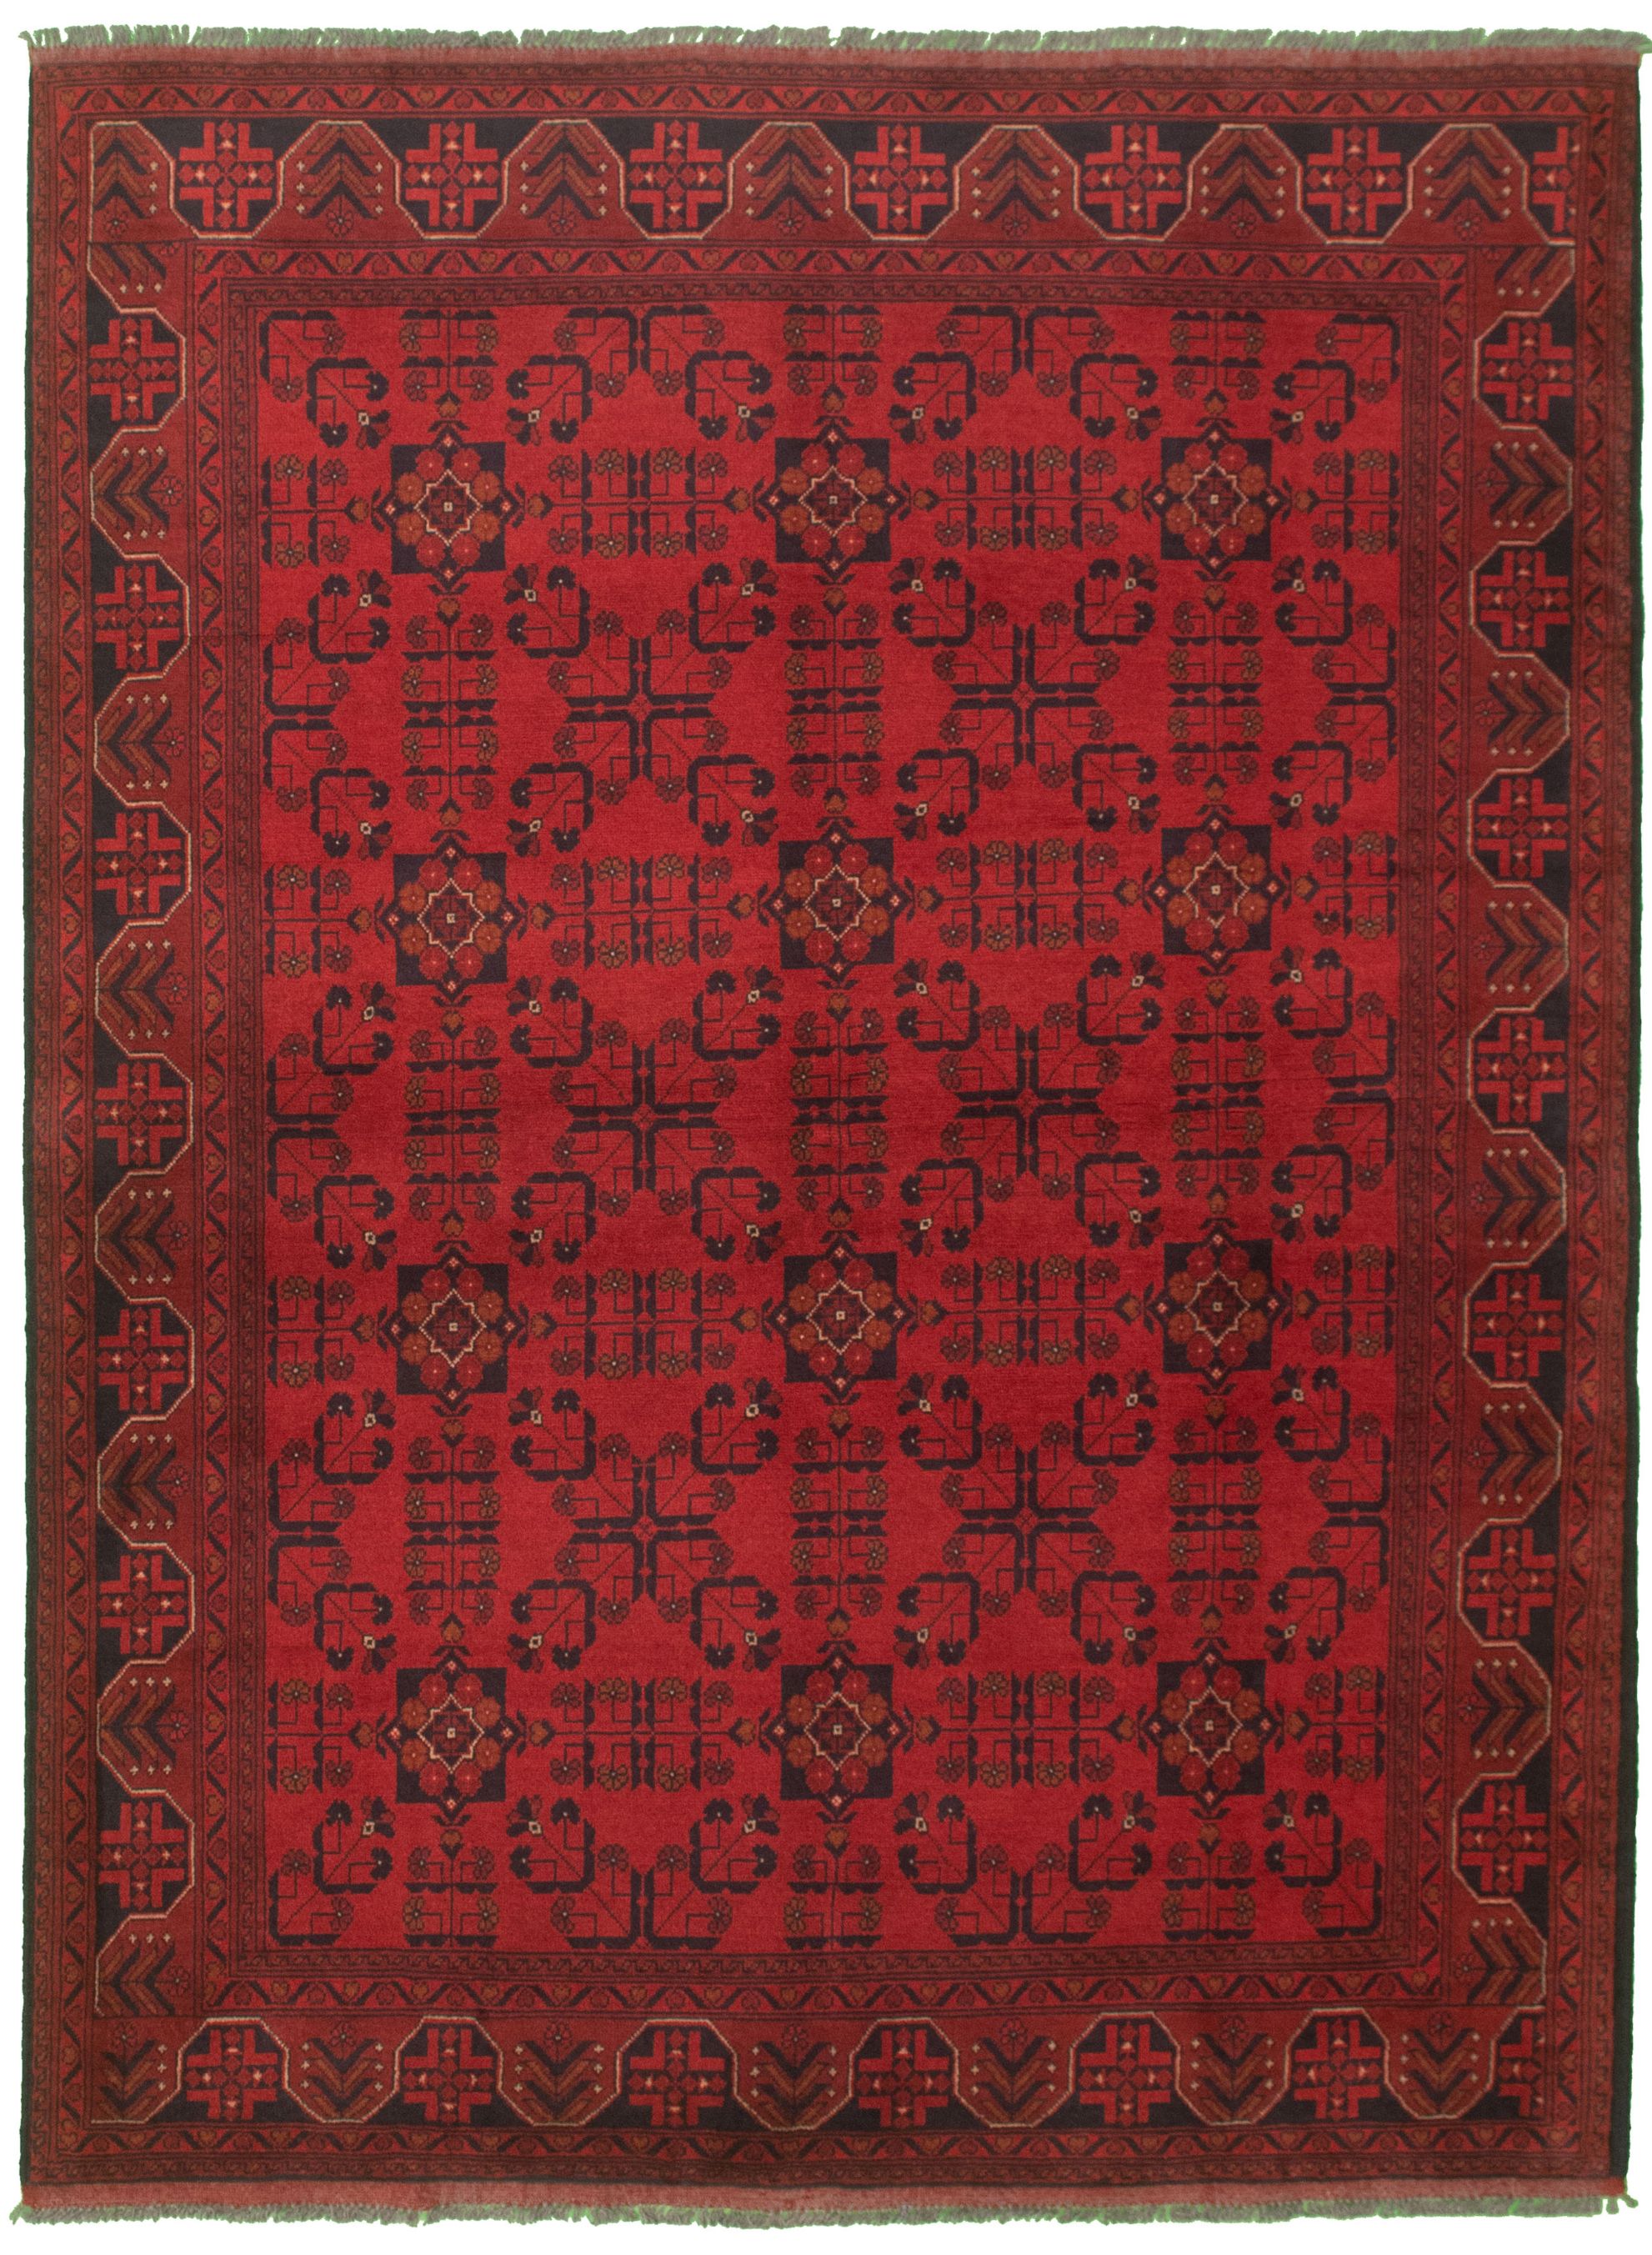 Hand-knotted Finest Khal Mohammadi Red Wool Rug 5'9" x 7'8"  Size: 5'9" x 7'8"  